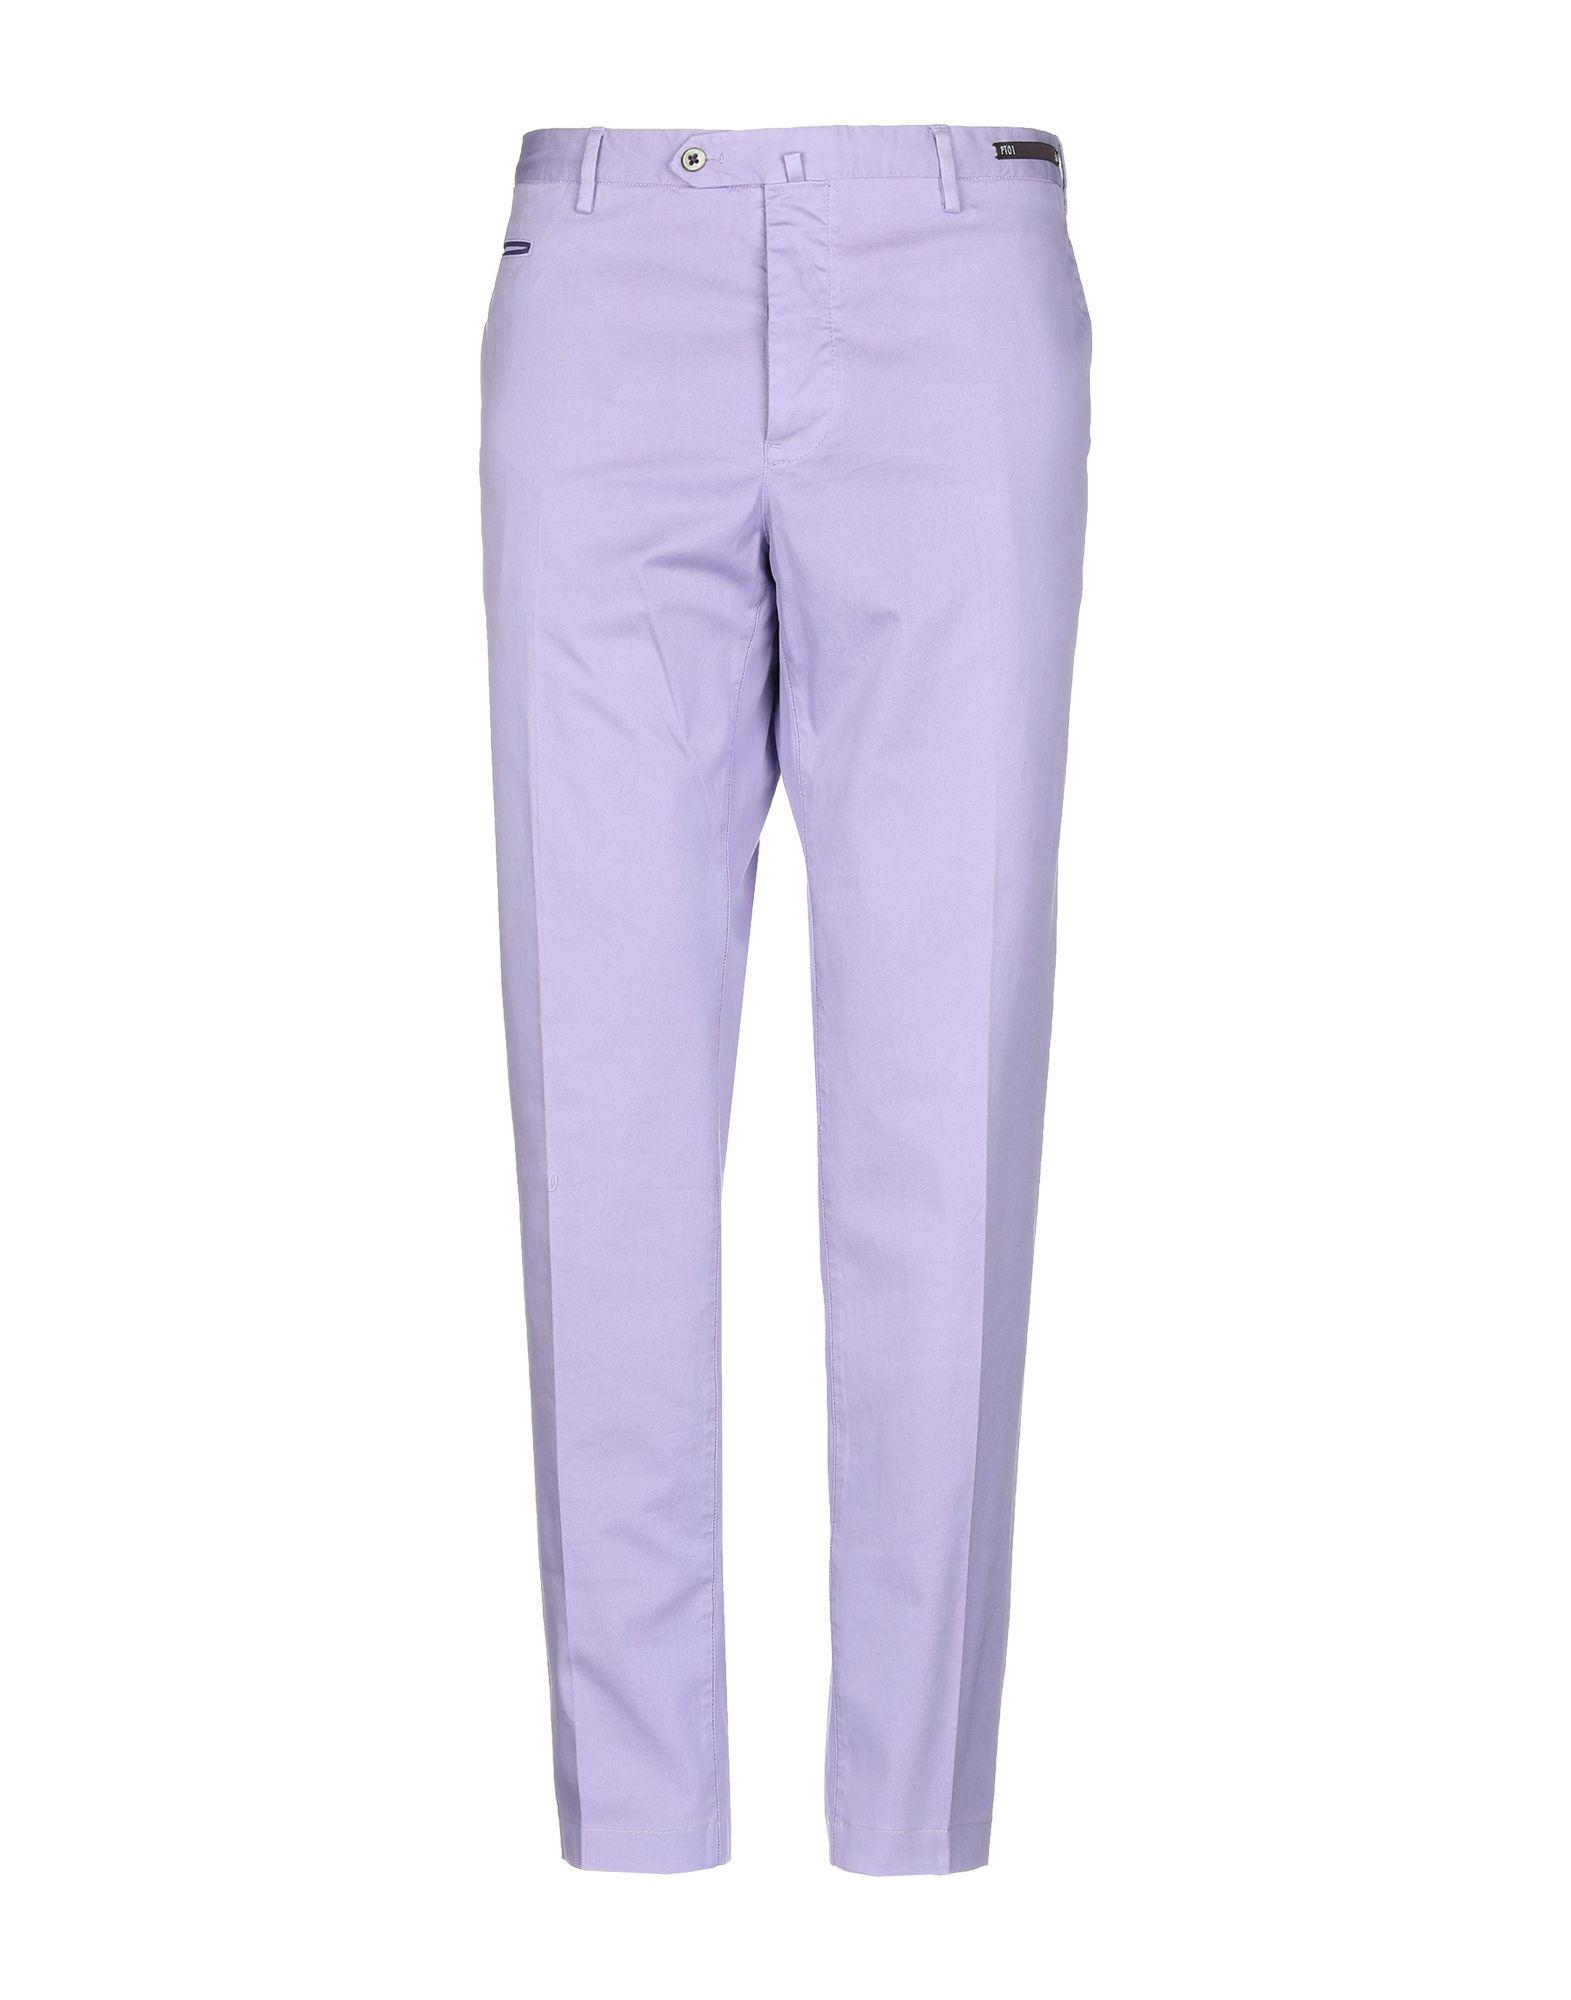 PT01 Cotton Casual Pants in Lilac (Purple) for Men - Lyst